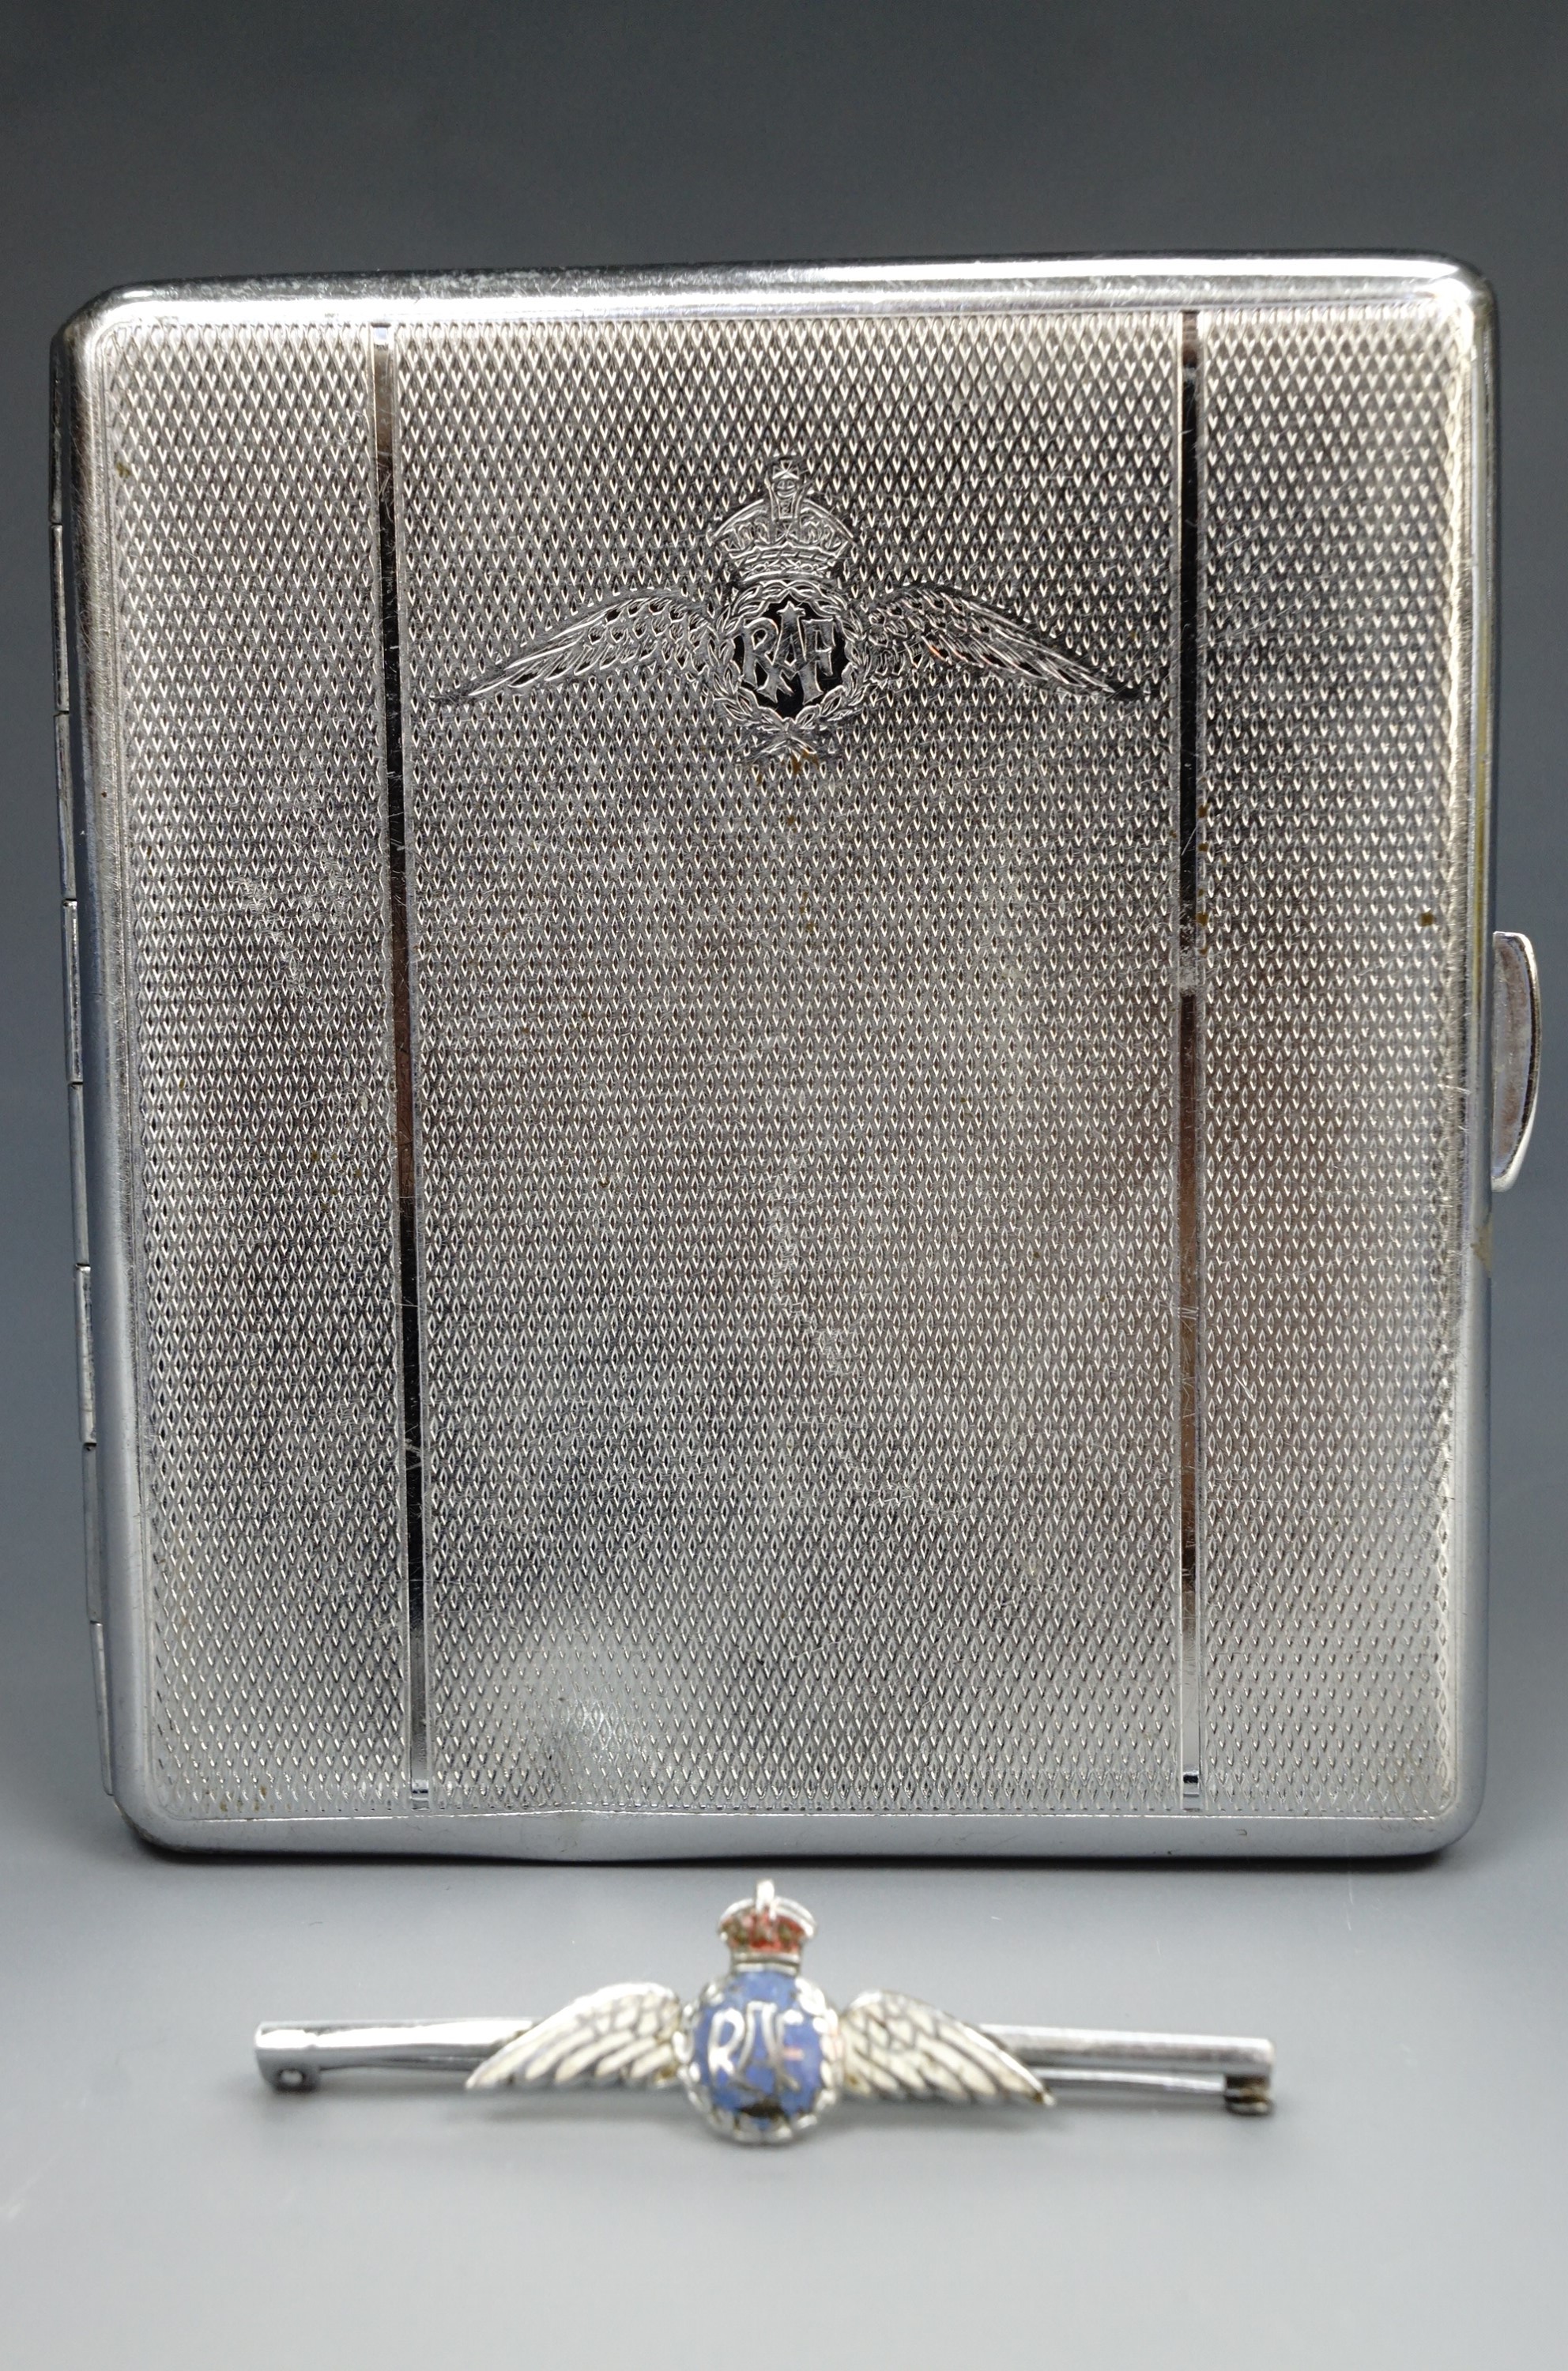 A chrome plated RAF cigarette case, together with an enamelled RAF sweetheart brooch